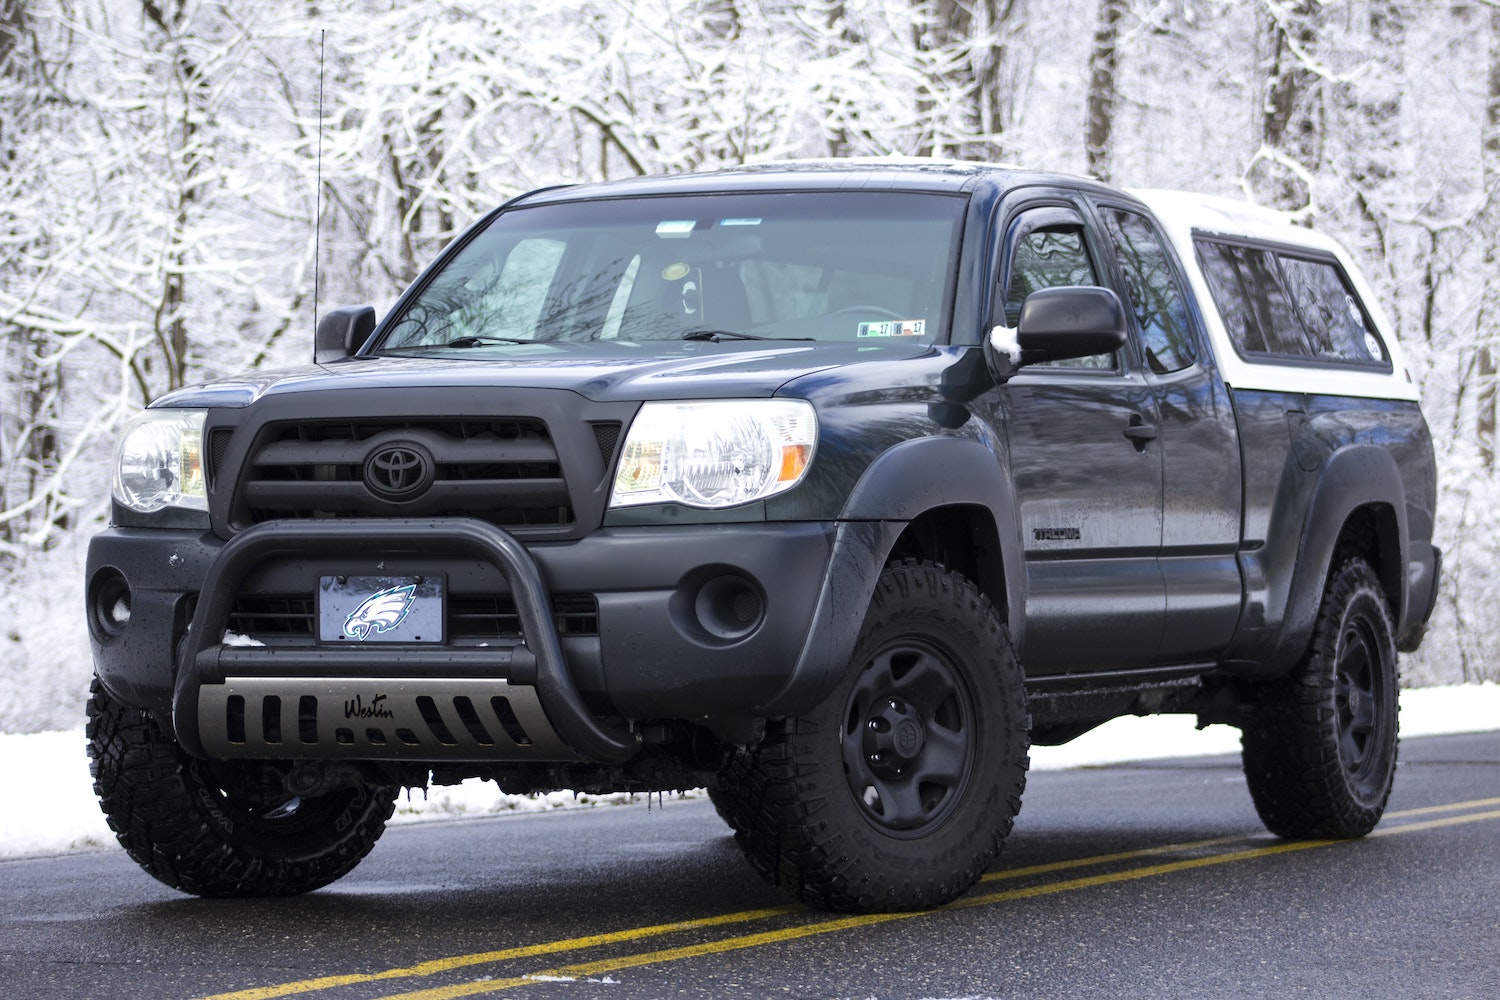 Black first generation Toyota Tacoma truck parked on a road in front of snow-covered trees.